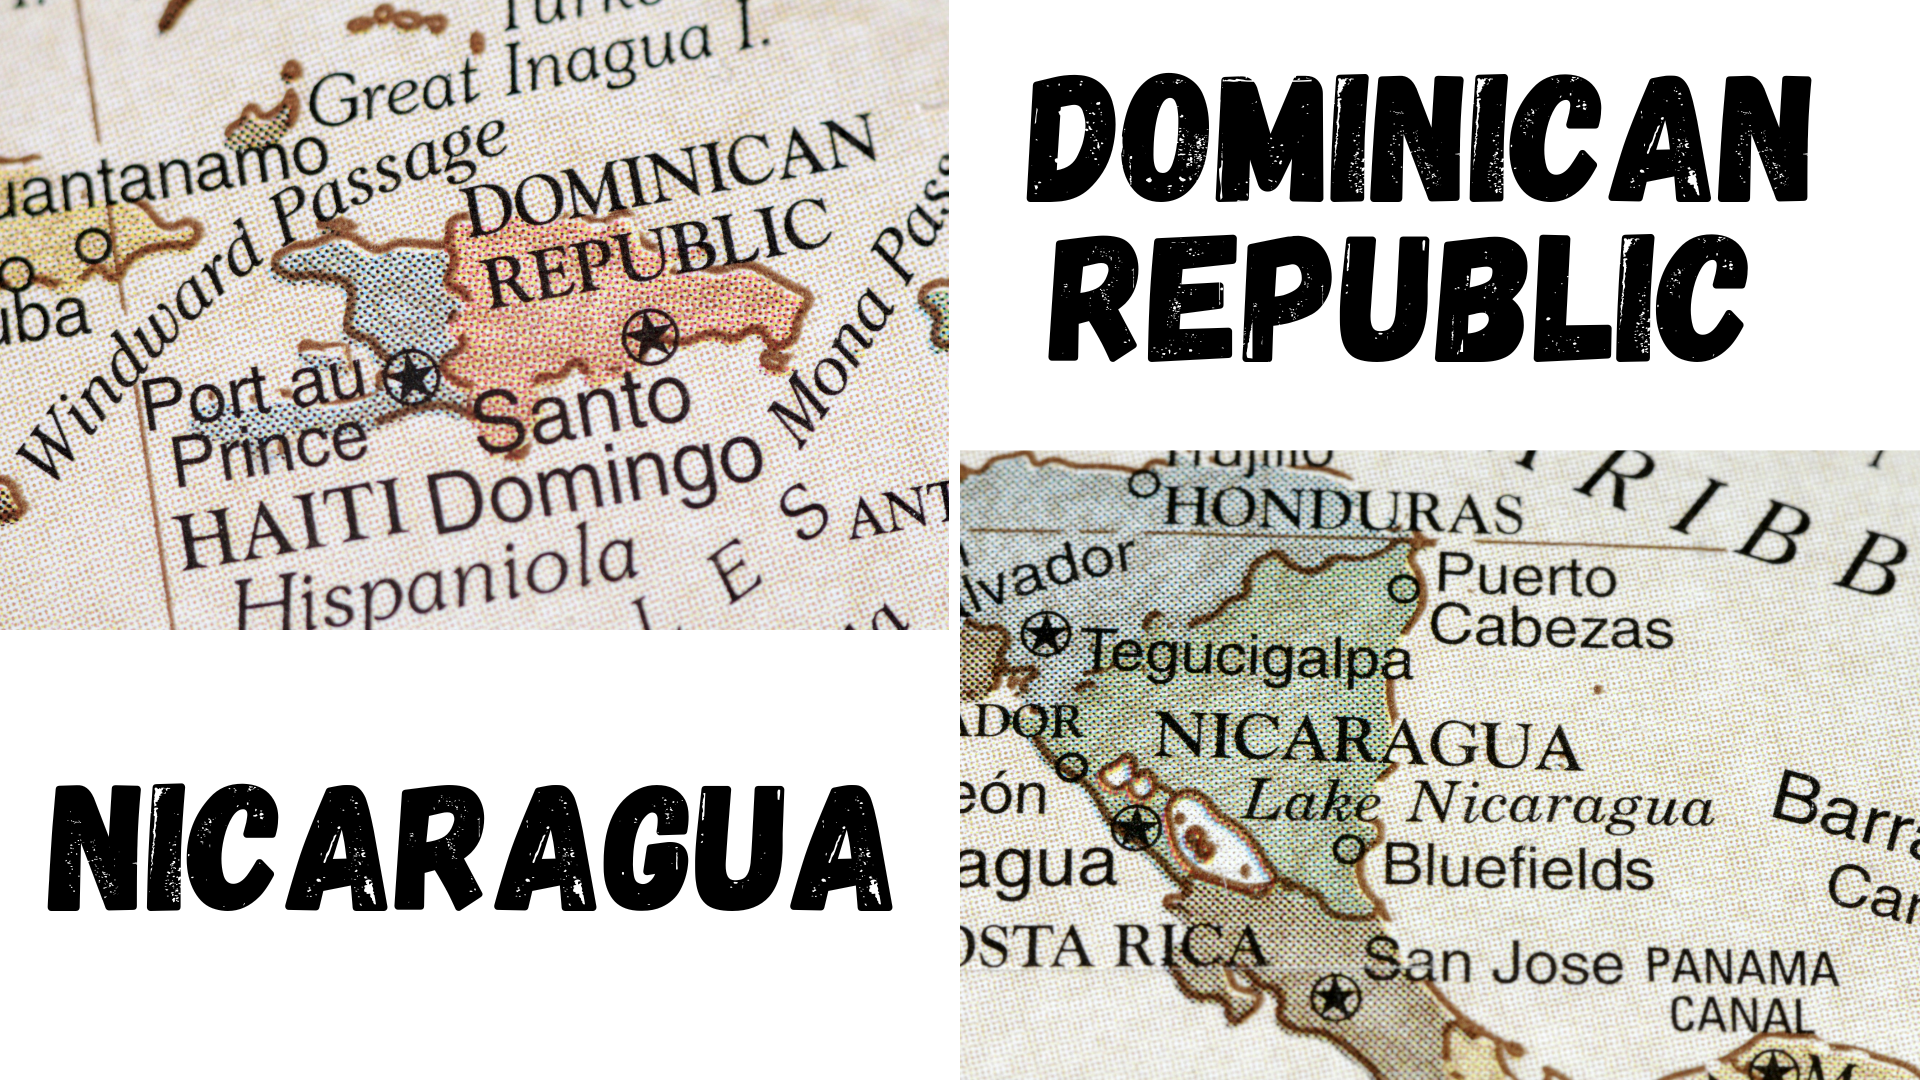 DOMINICAN vs NICARAGUAN comparing the differences